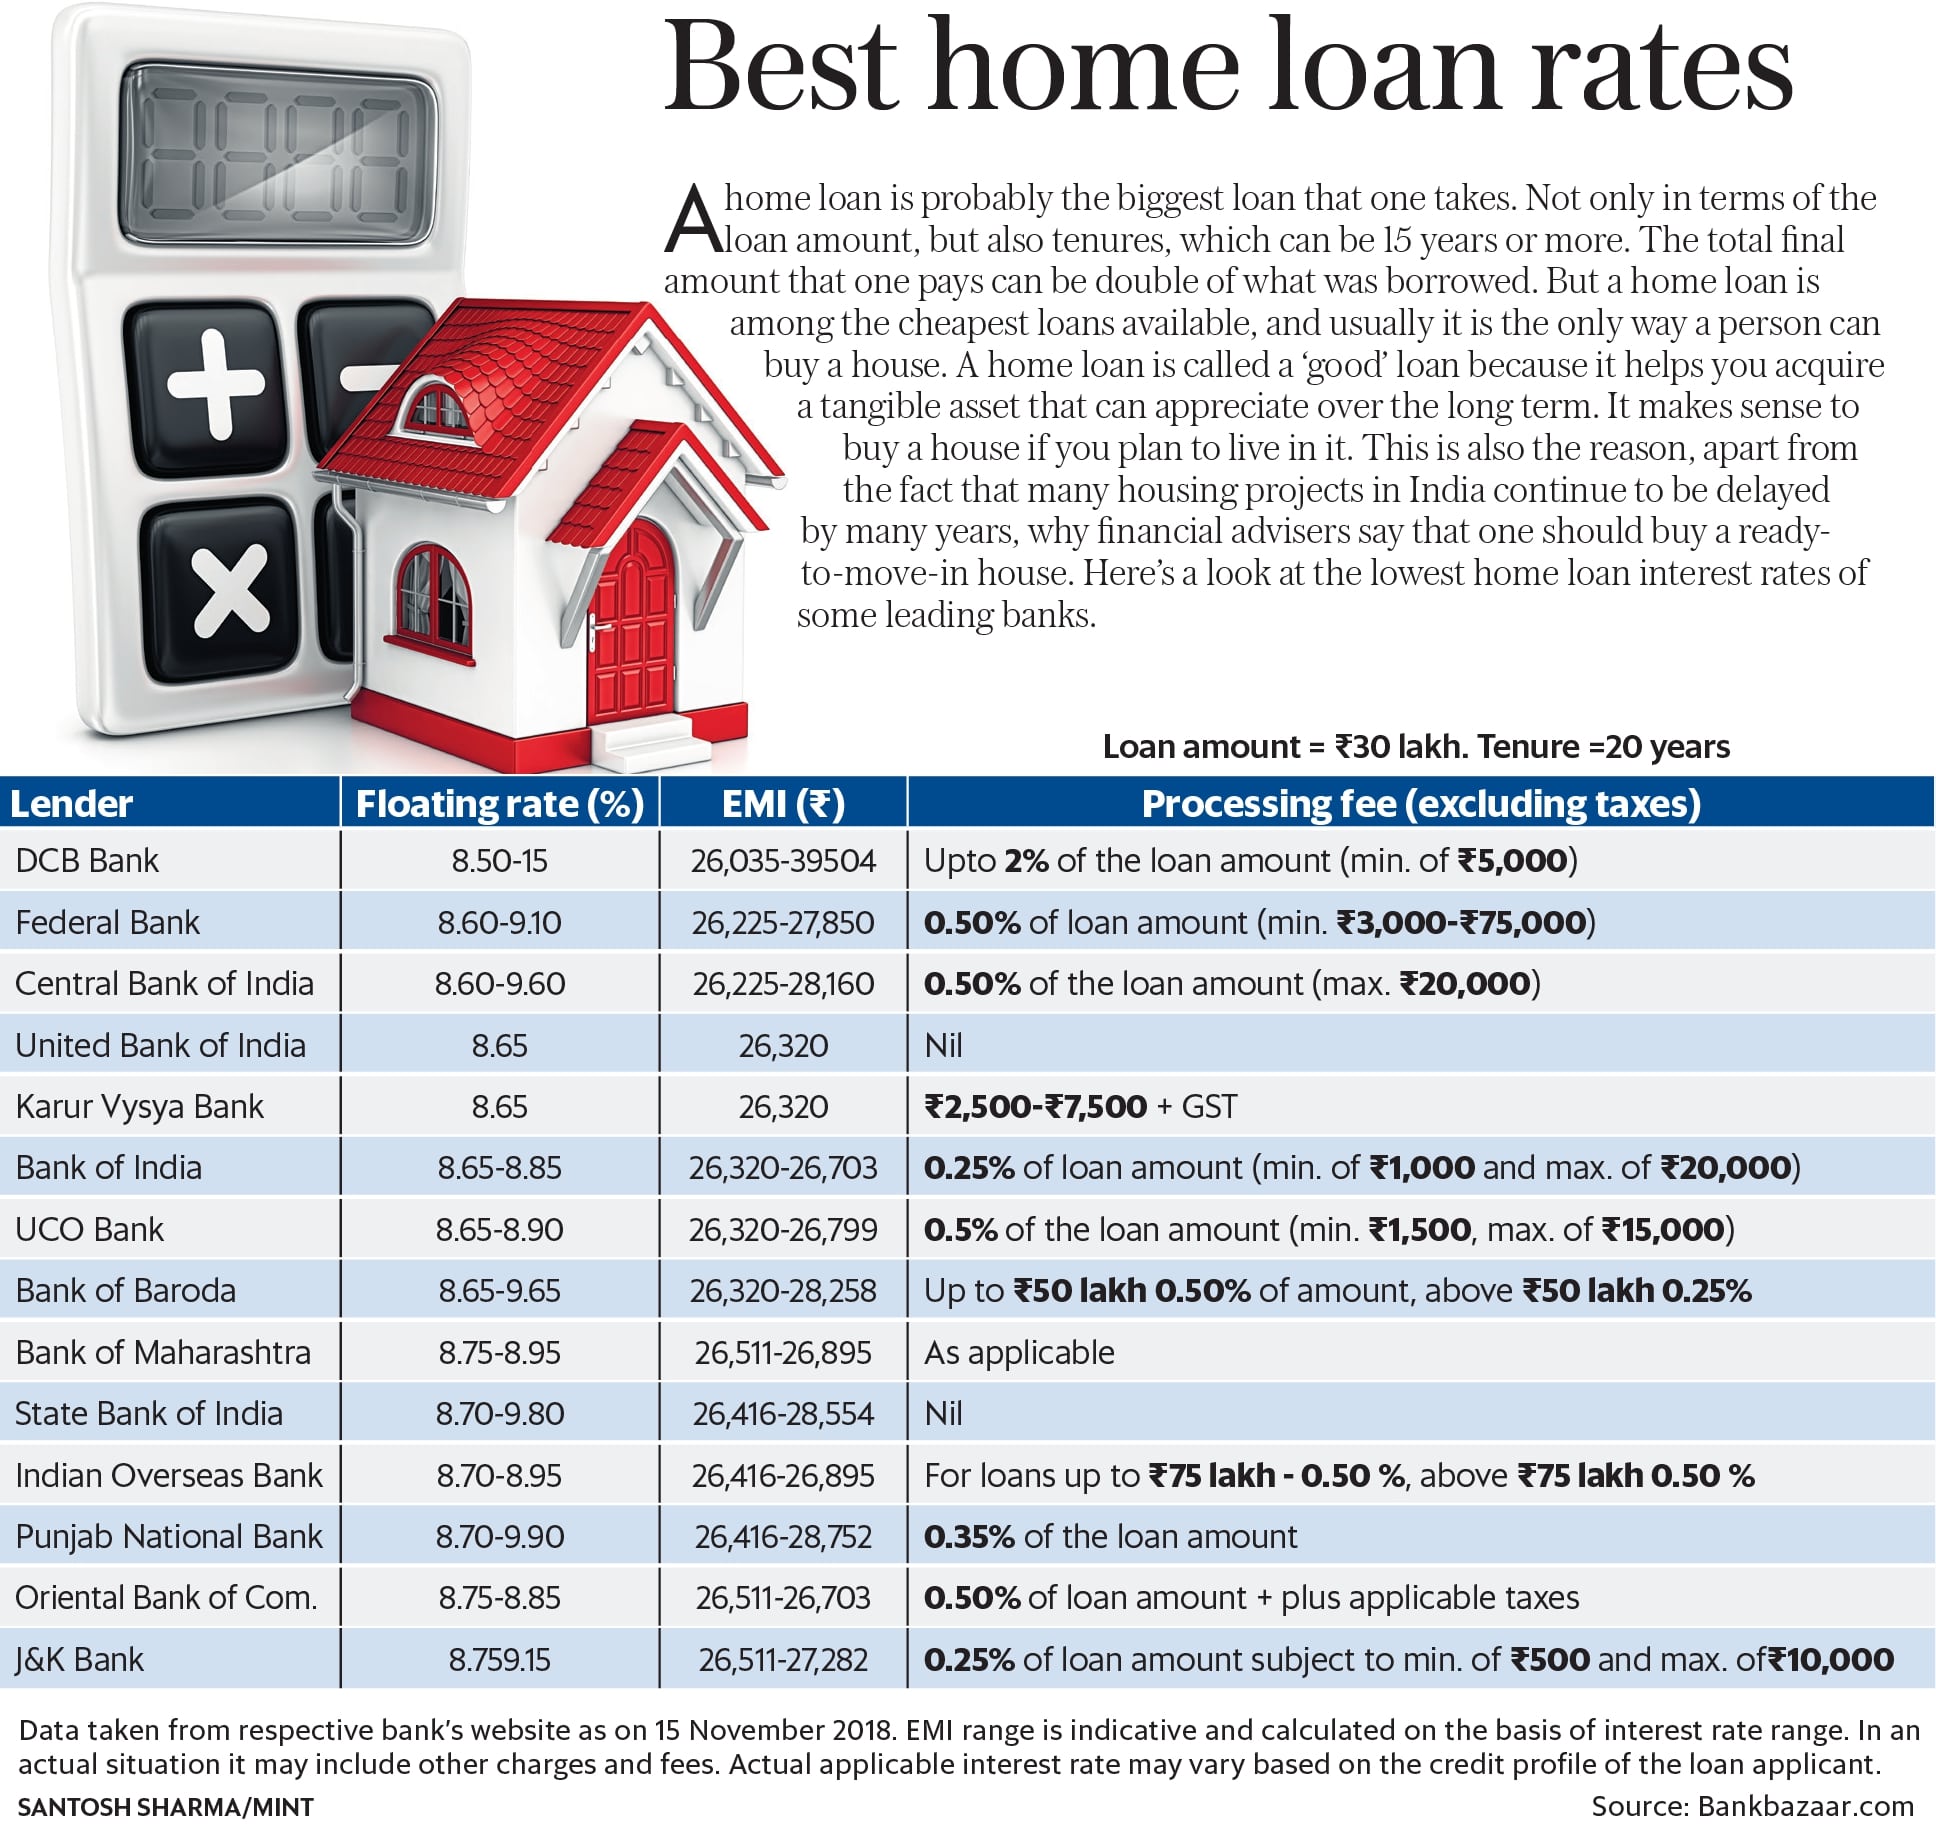 Best home loan interest rates from SBI, PNB, other banks ...